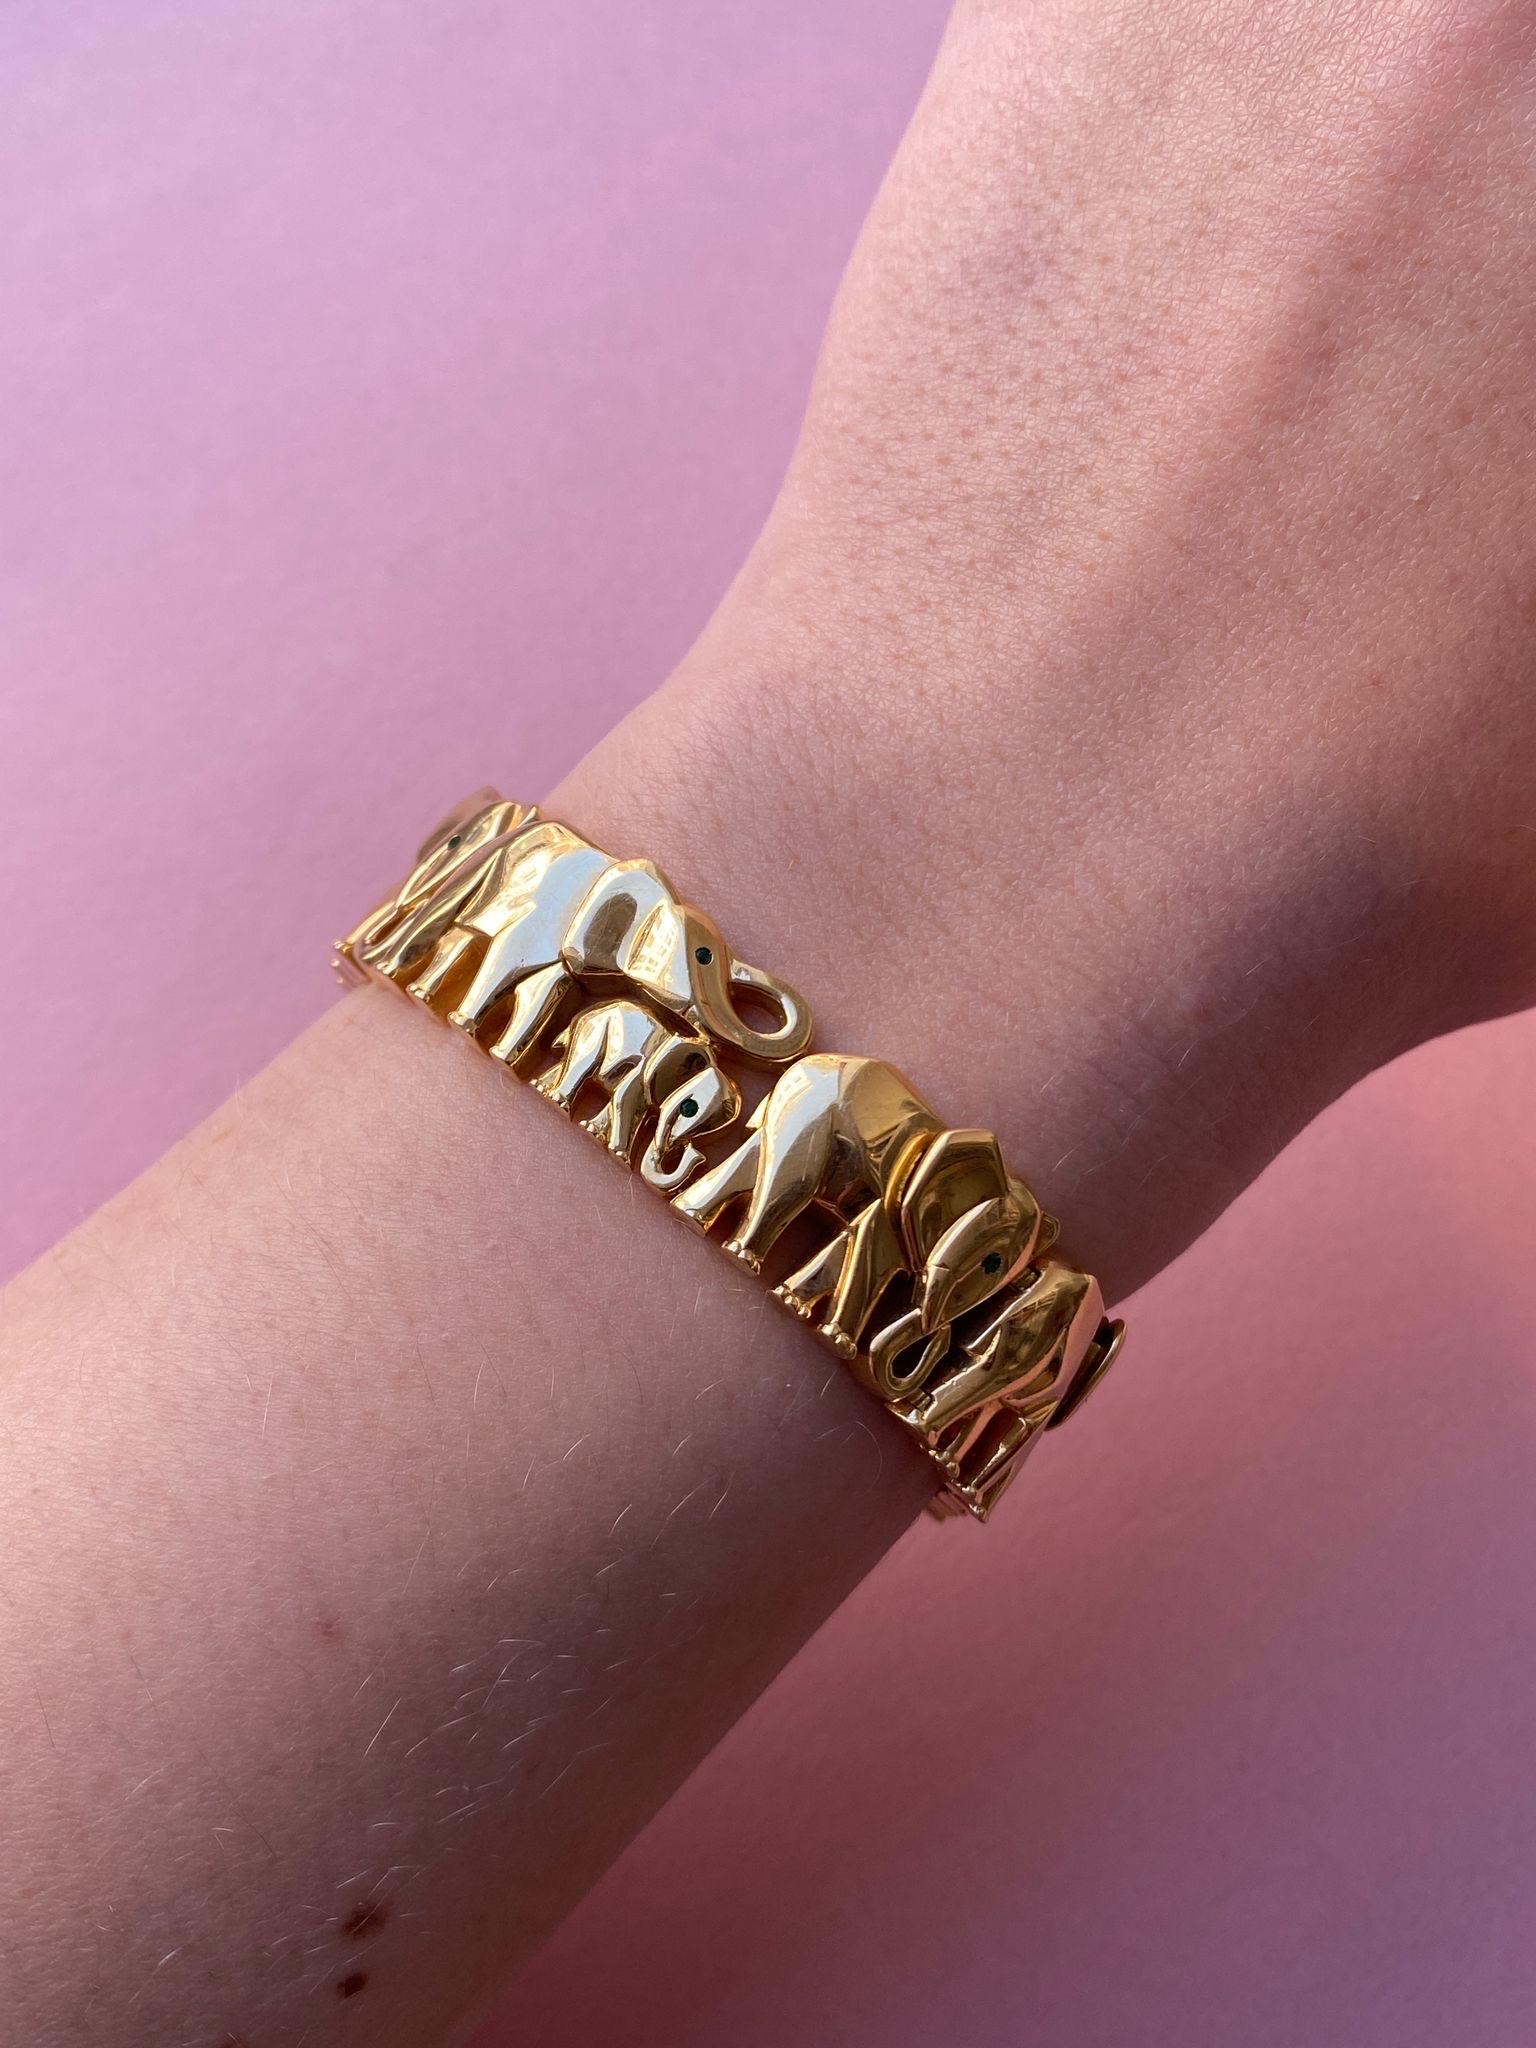 Just in: The gorgeous, collectible, 18-carat flexible yellow gold bracelet from the Khandy collection featuring 11 elephants in various postures and sizes and with tsavorite eyes. The lock is concealed in one ear. Signed and numbered: Cartier,